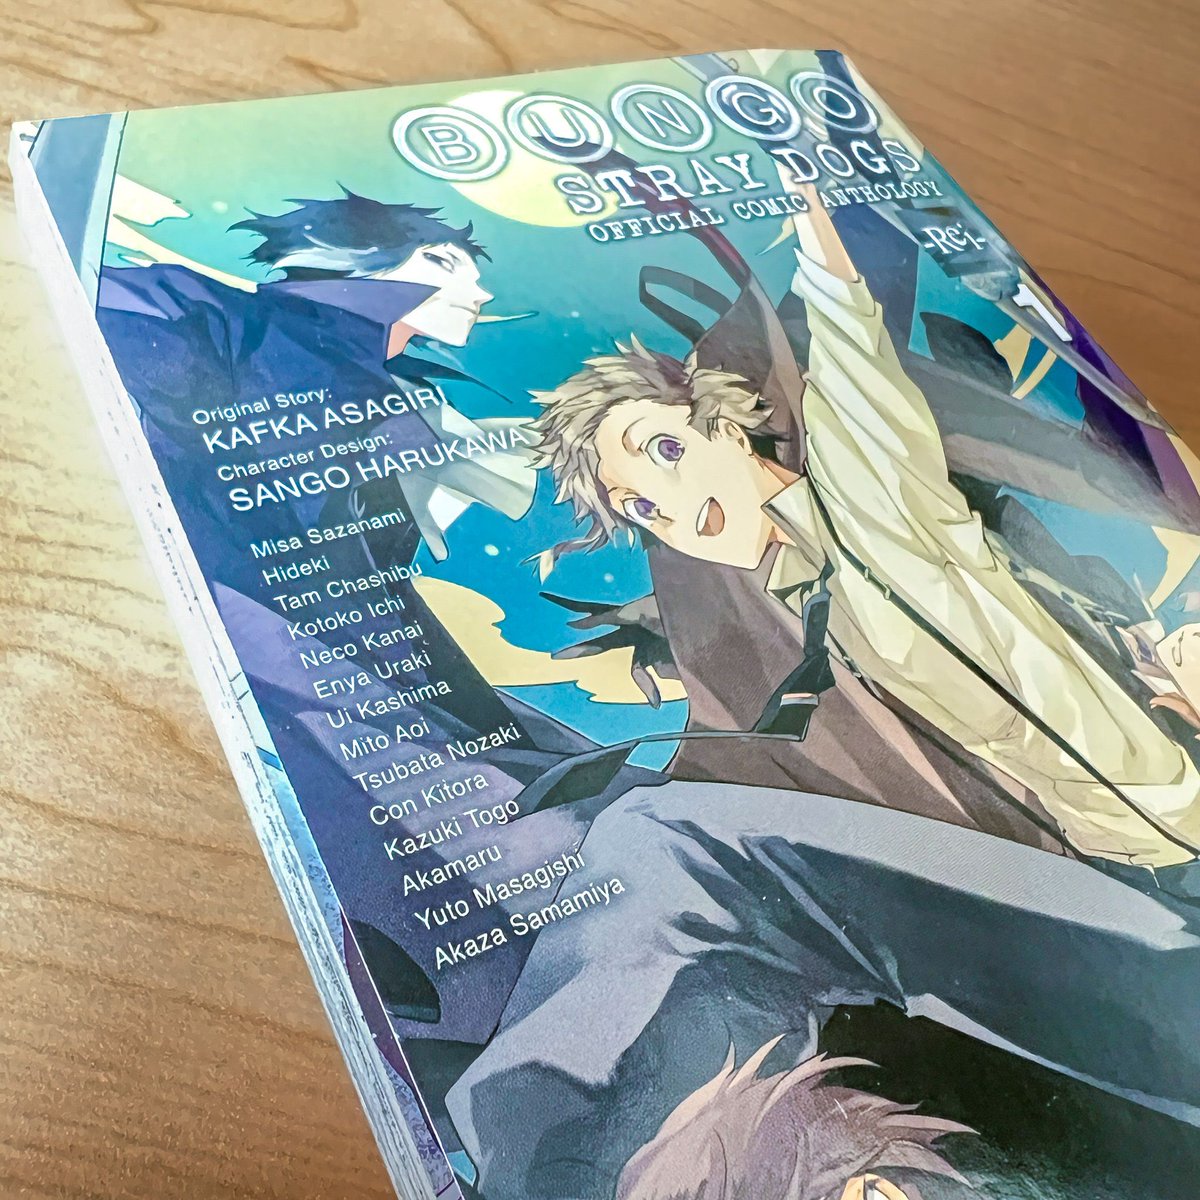 Have you seen the artist lineup for the Bungo Stray Dogs: The Official Comic Anthology?👀

Well, here's a close up look at the list, right on the cover!😌✍️

Get an even CLOSER look by picking up your very own copy, available May 28th! buff.ly/3Tf5QOJ